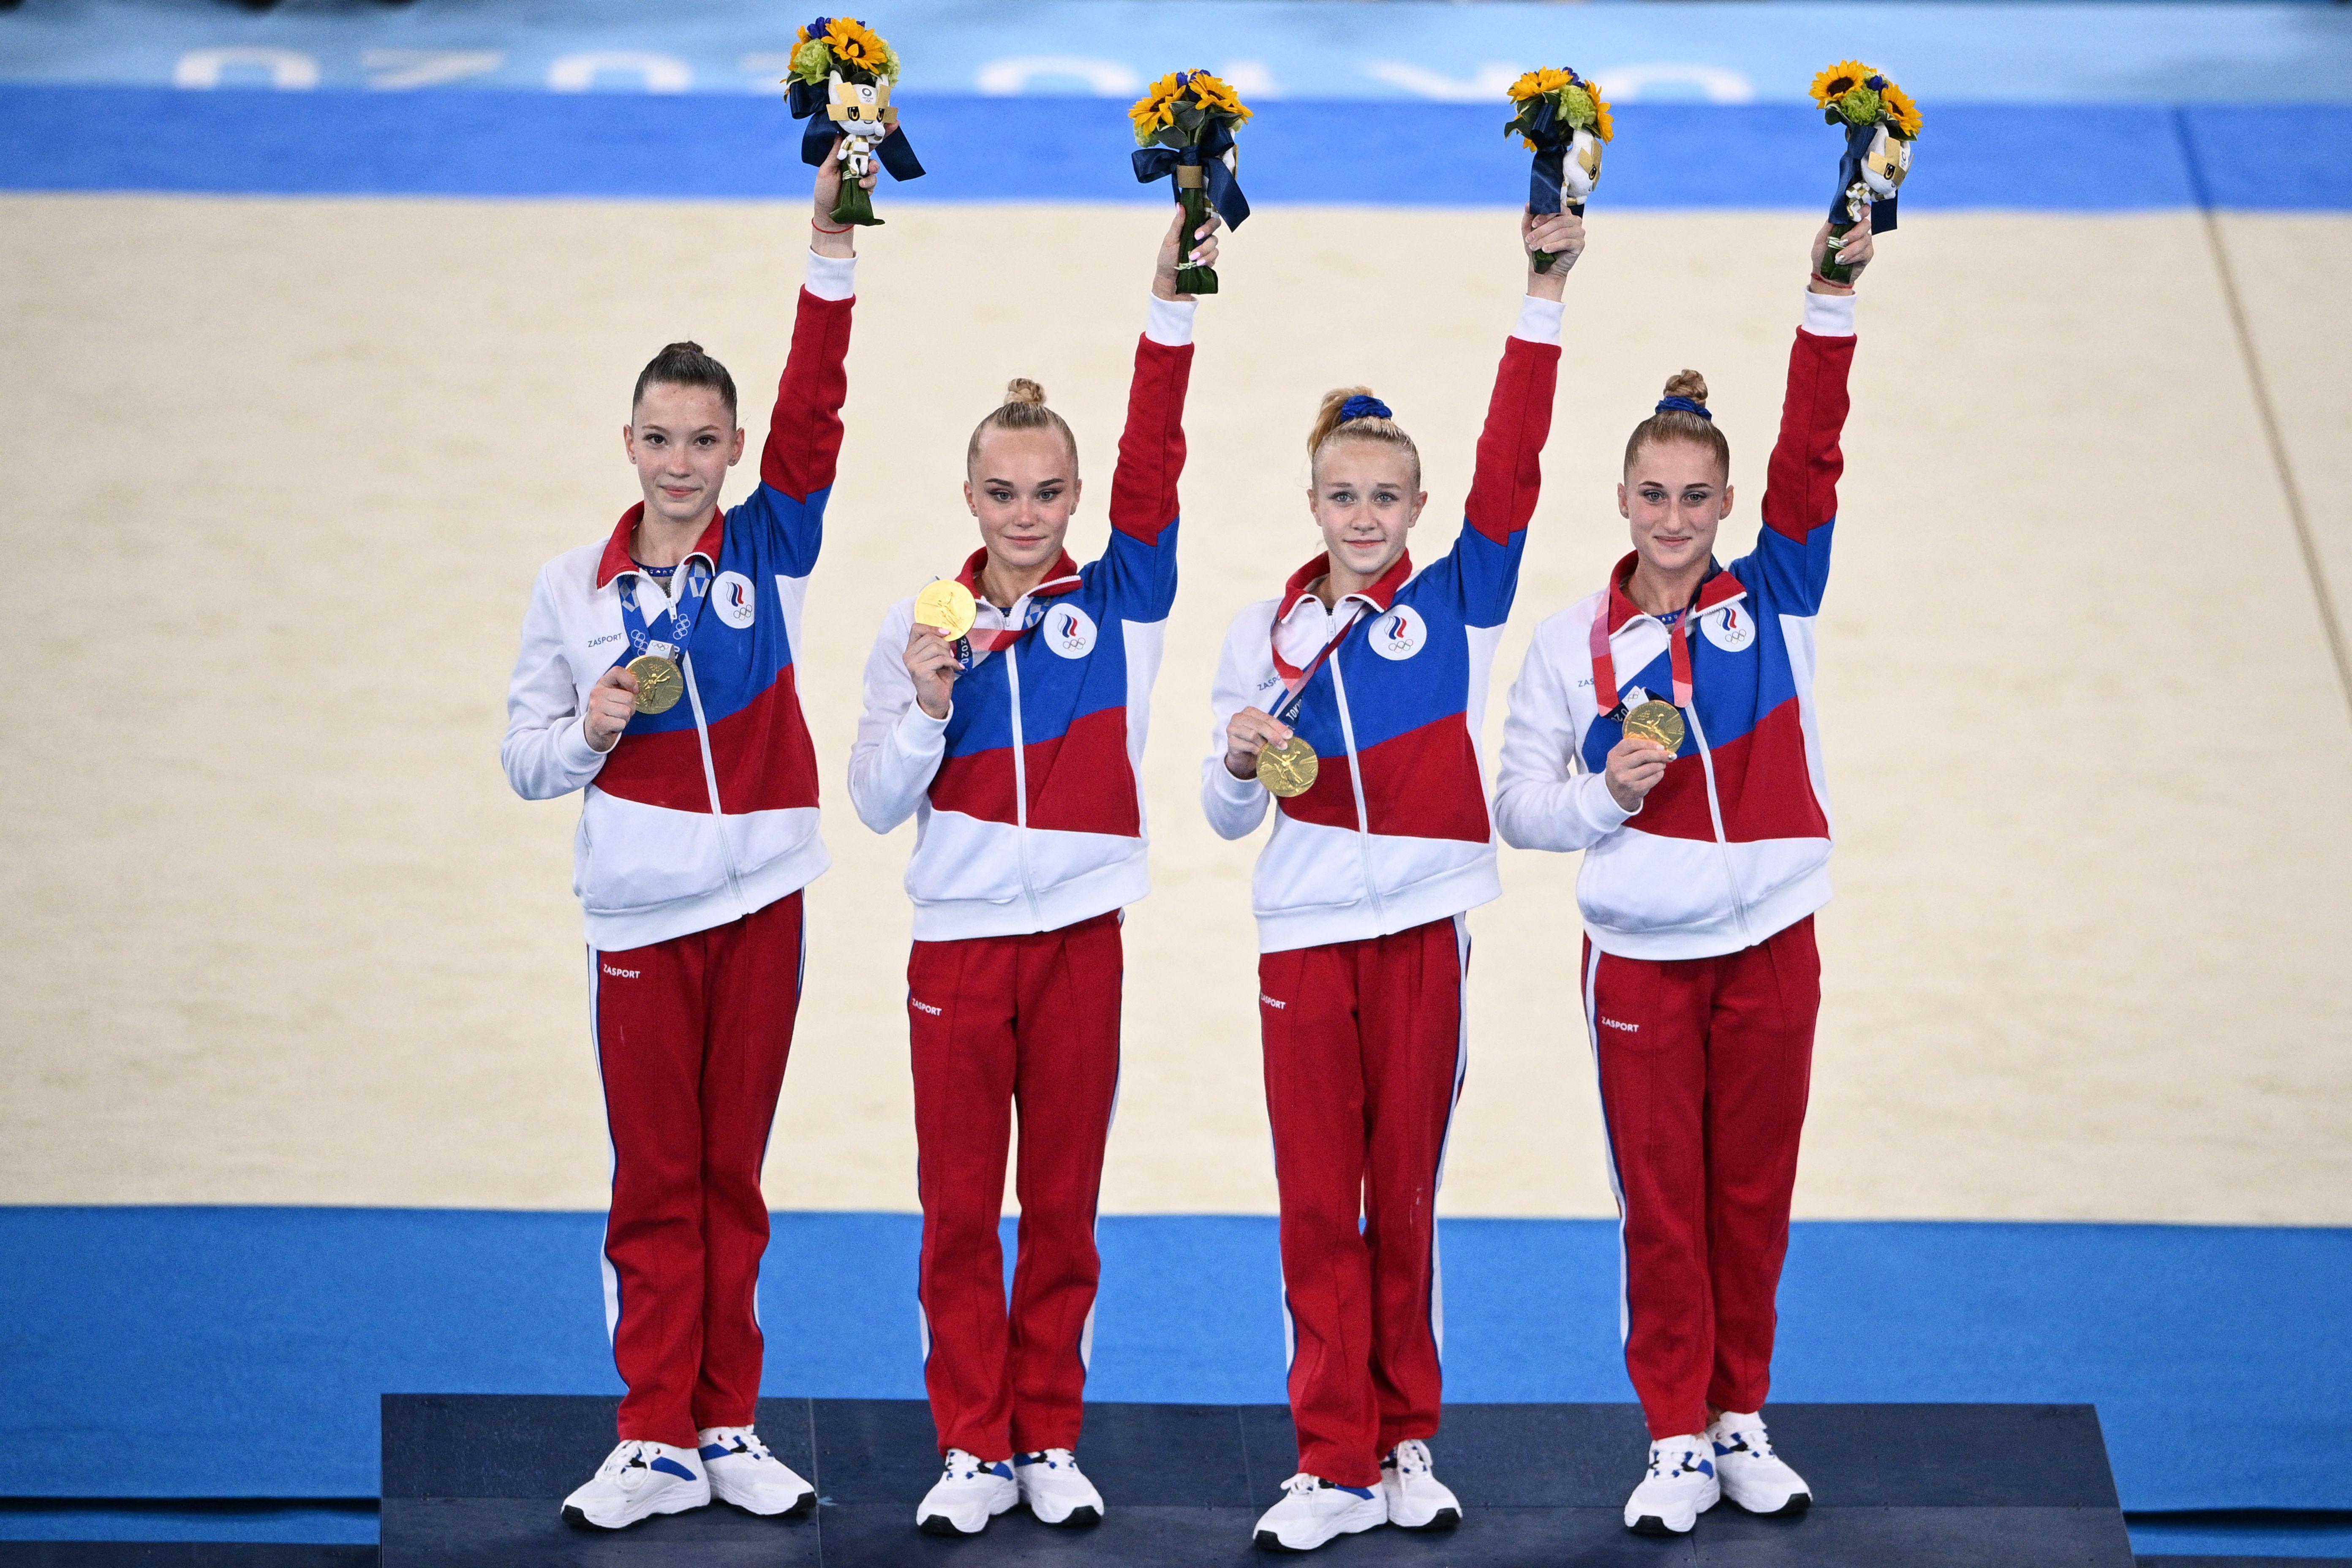 Four women on a podium raise bouquets of flowers in a victory gesture.